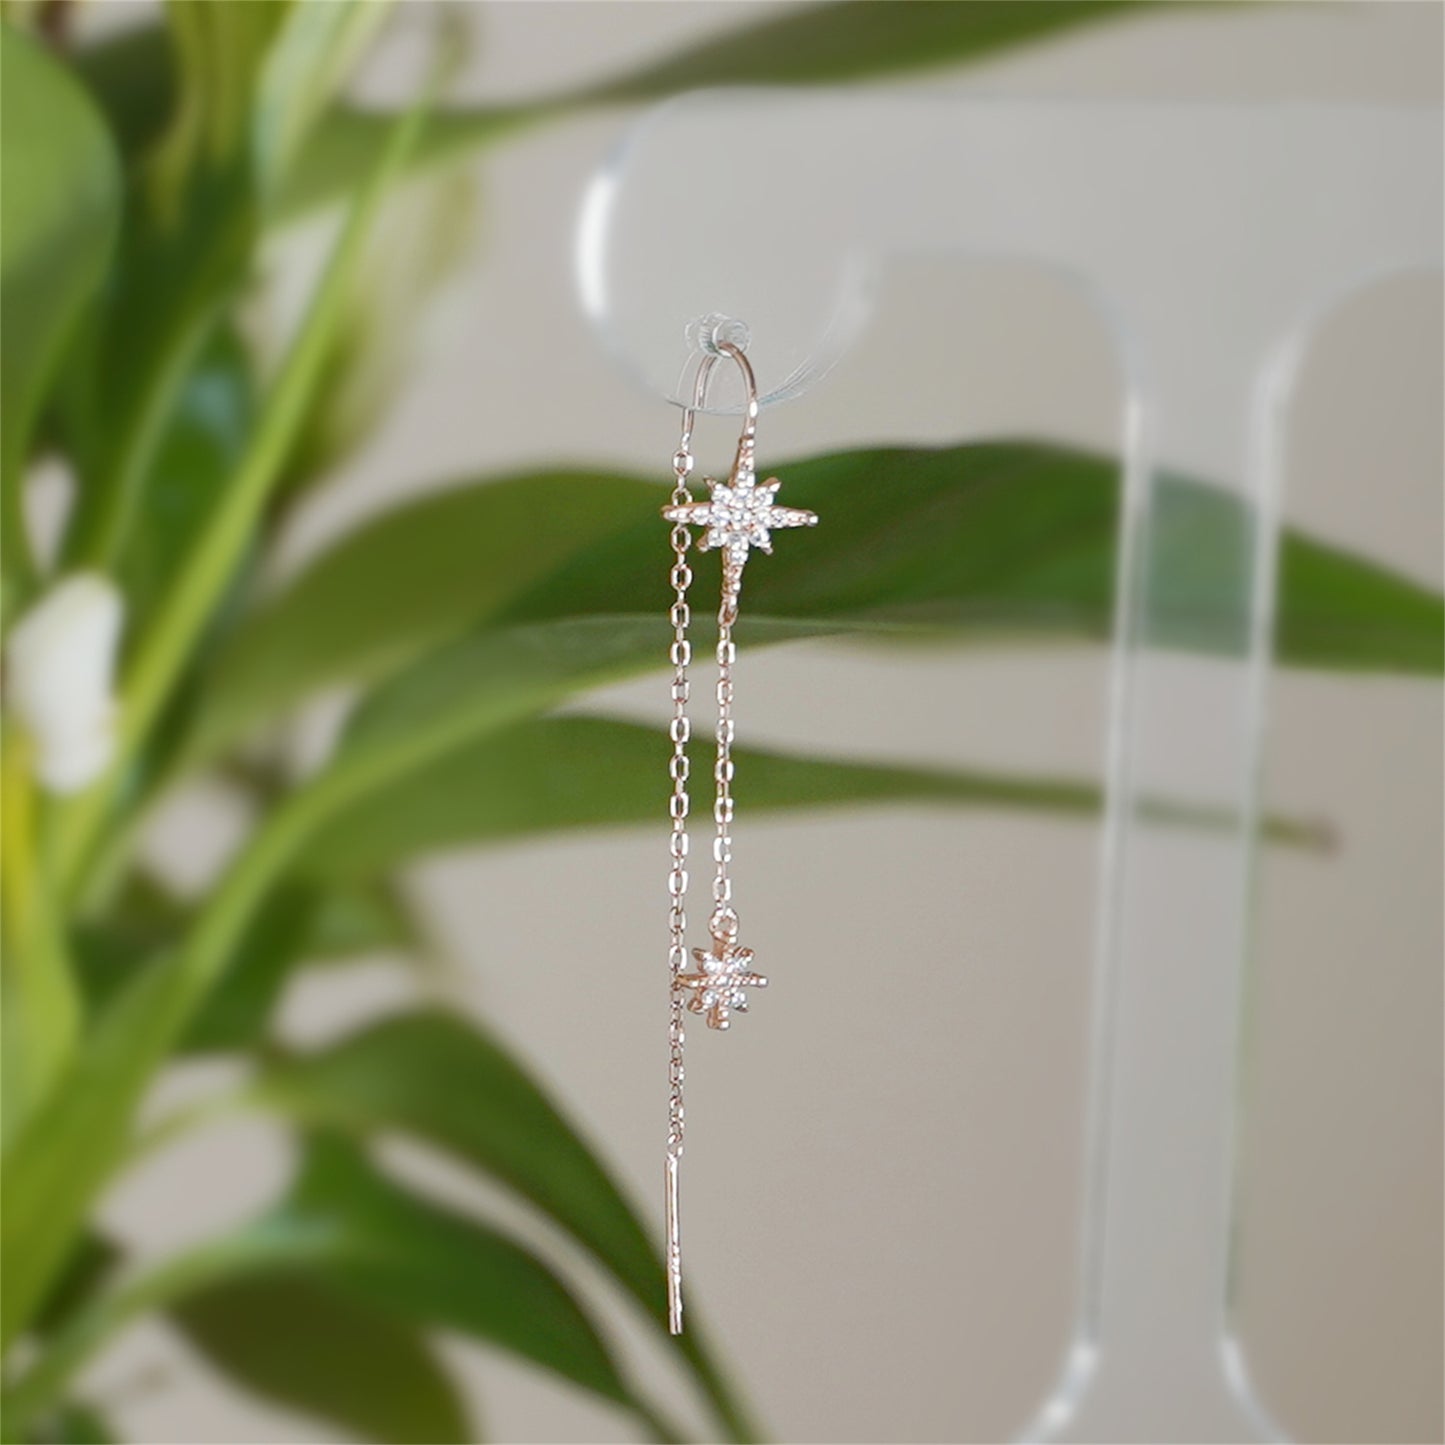 Rose Gold Threader Earrings with Paved CZ Pole Star Chain Drops - sugarkittenlondon